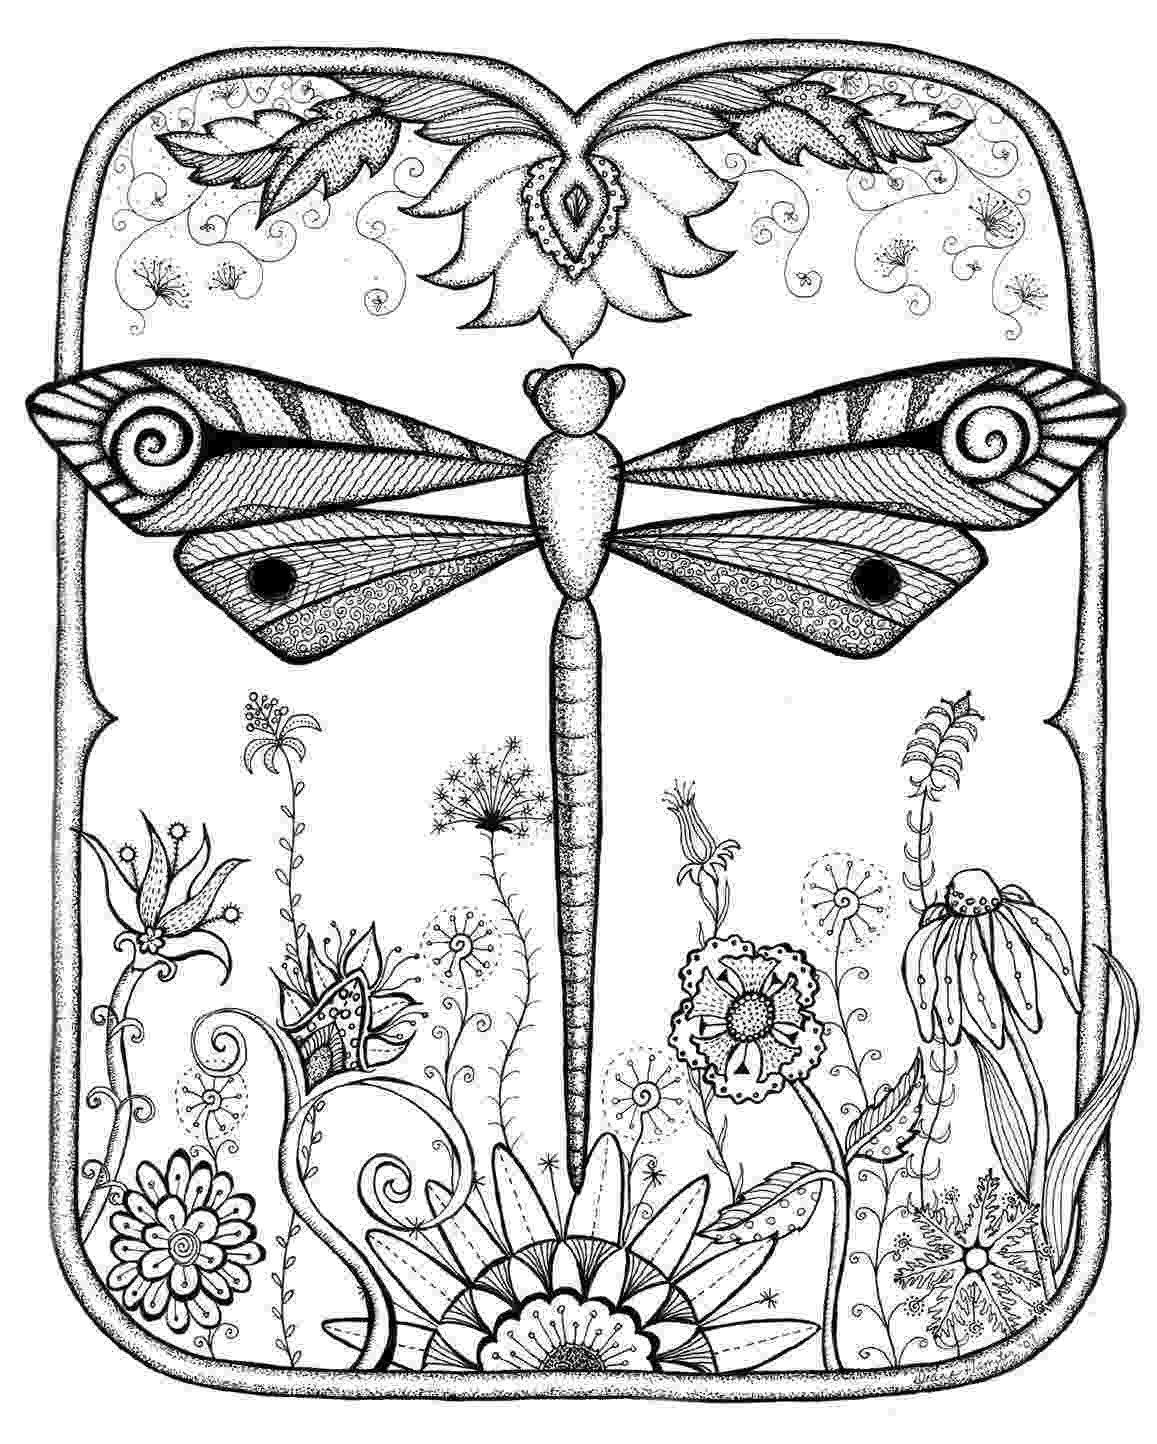 color zentangle zentangle to color for kids zentangle kids coloring pages zentangle color 